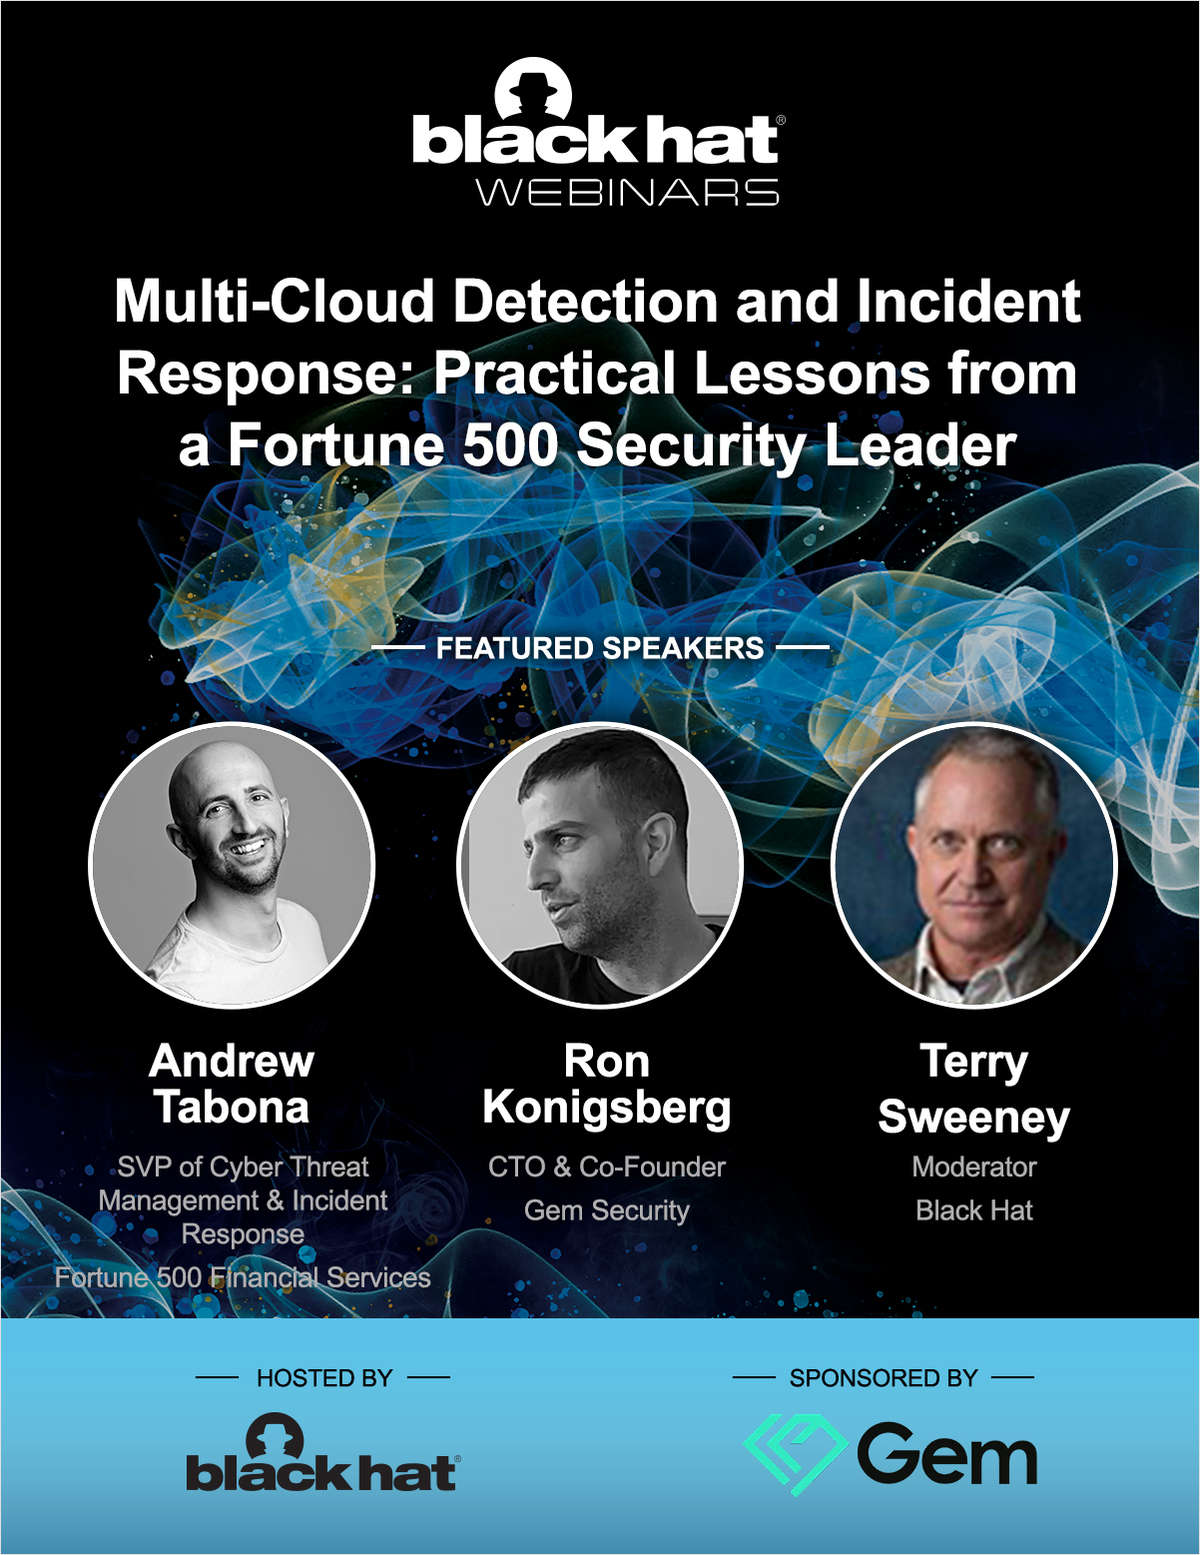 Multi-Cloud Detection and Incident Response: Practical Lessons from a Fortune 500 Security Leader